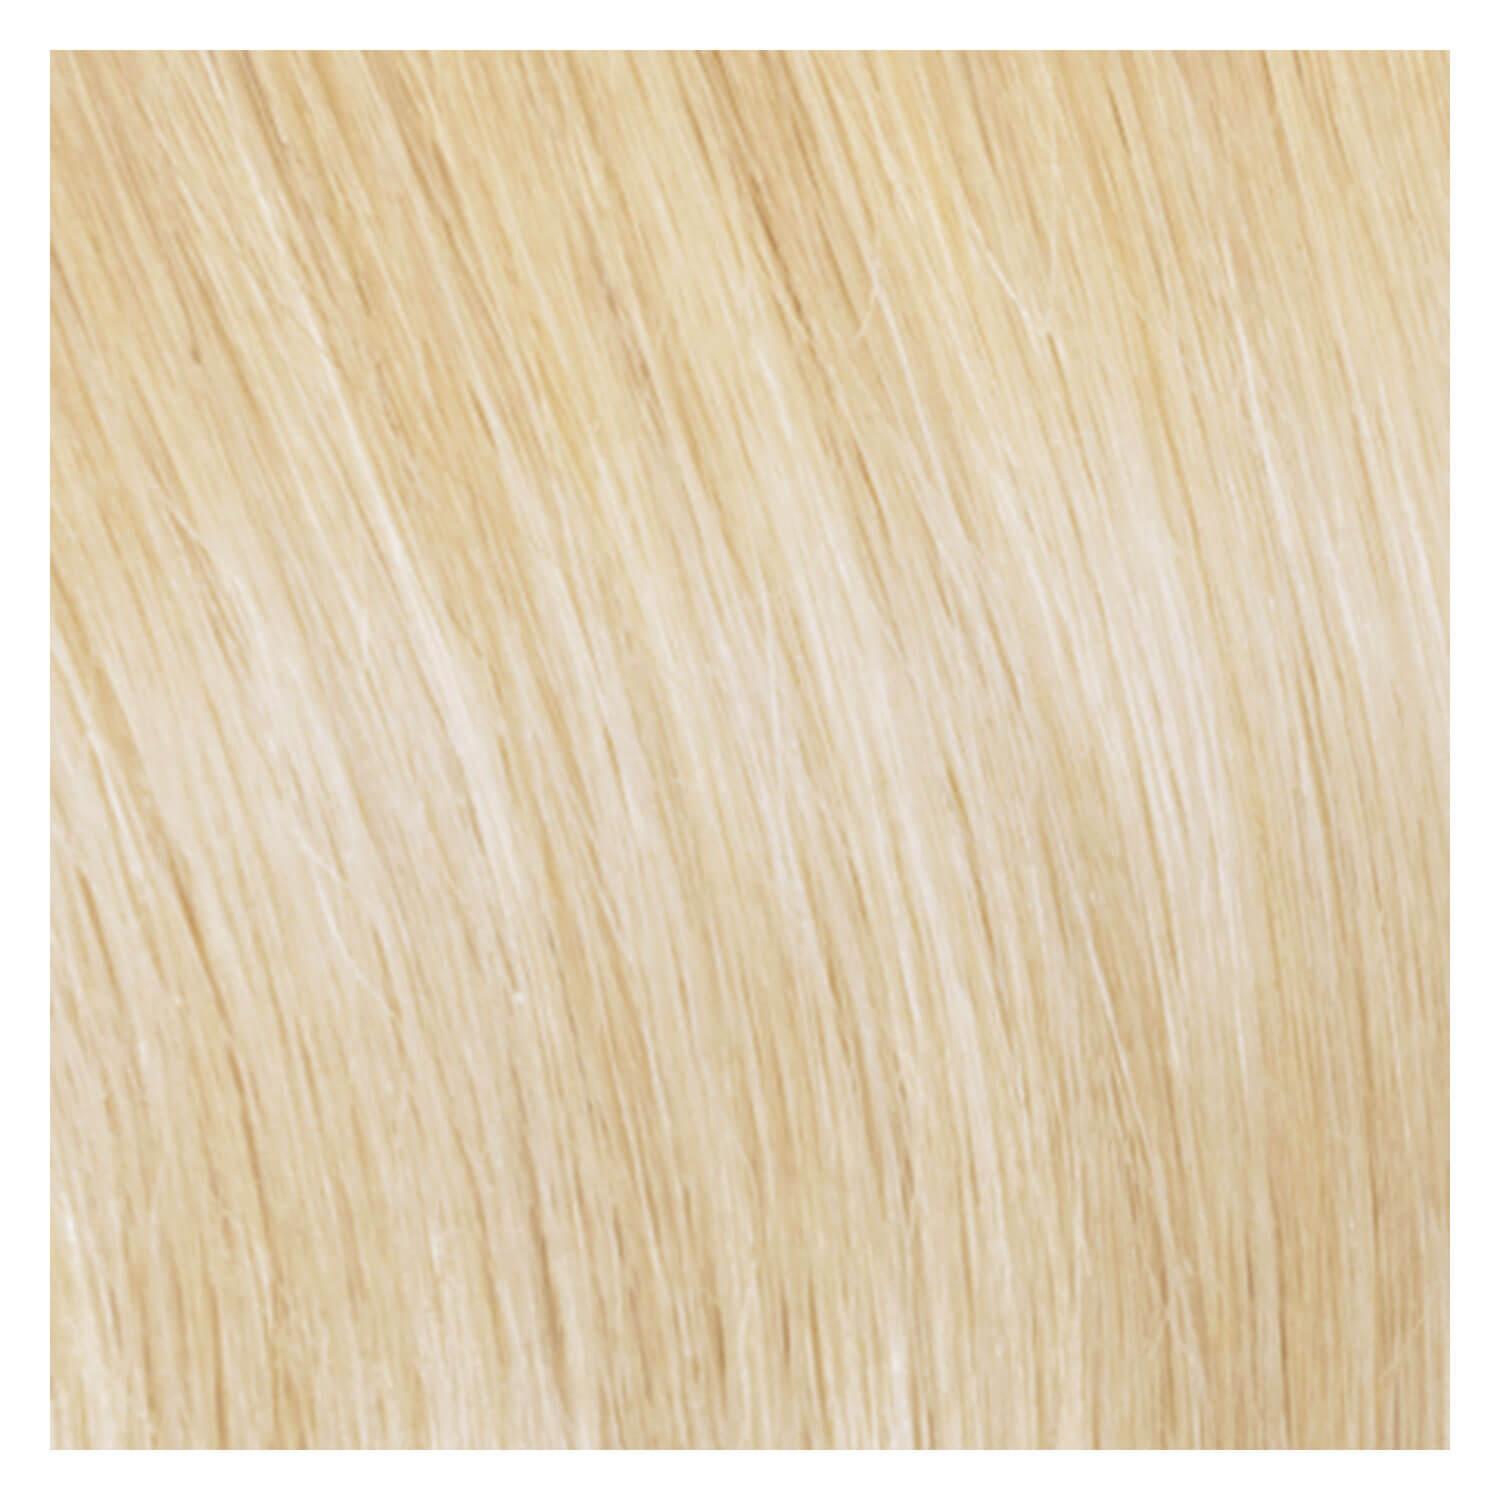 SHE Flip In-System Hair Extensions - 1001 Blonde Platine très Brillante 50/55cm